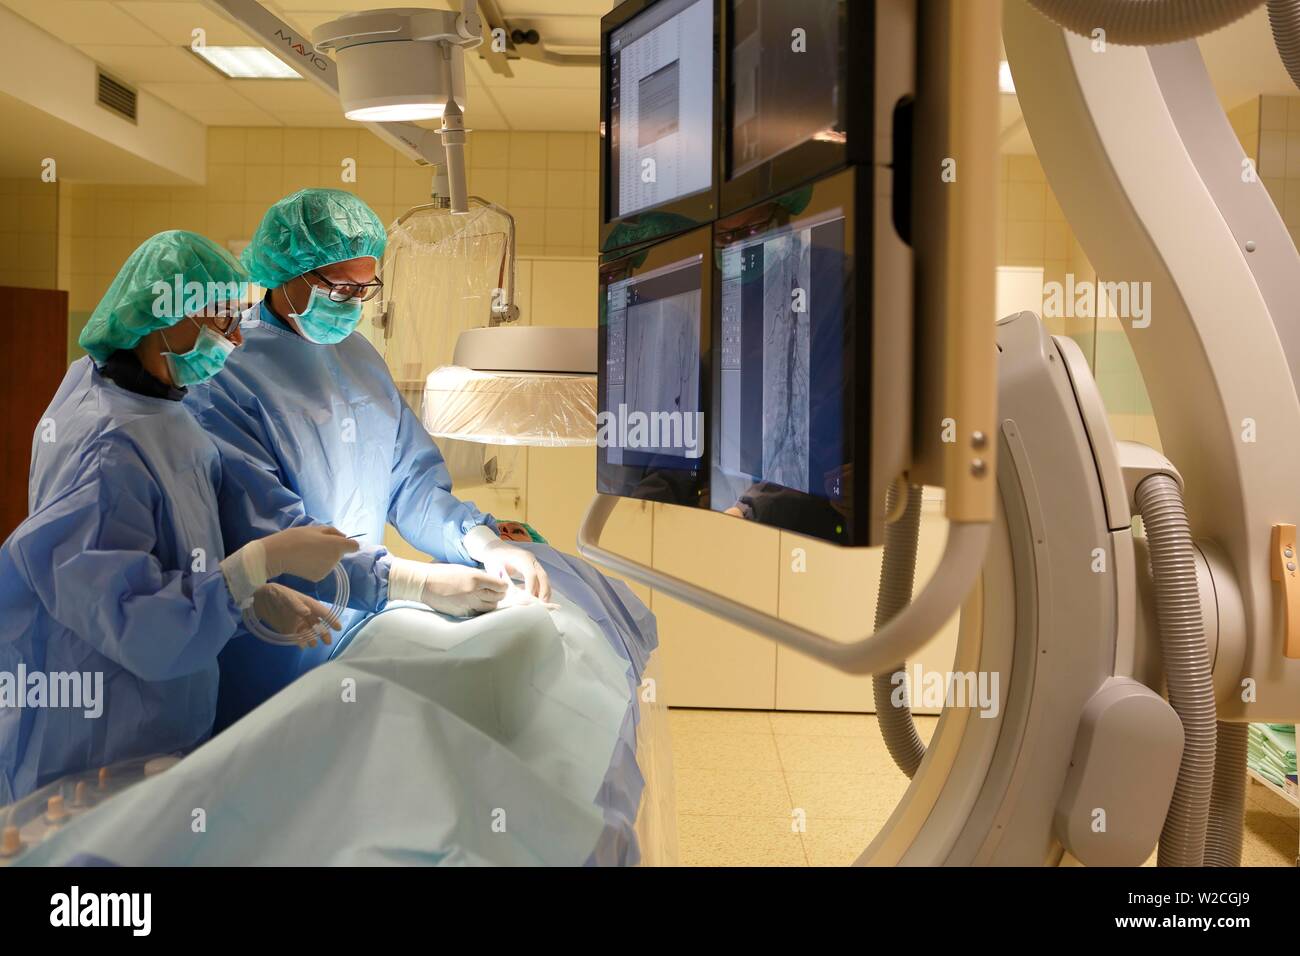 Interventional radiology, doctor with nurse during surgery, Karlovy Vary, Czech Republic Stock Photo